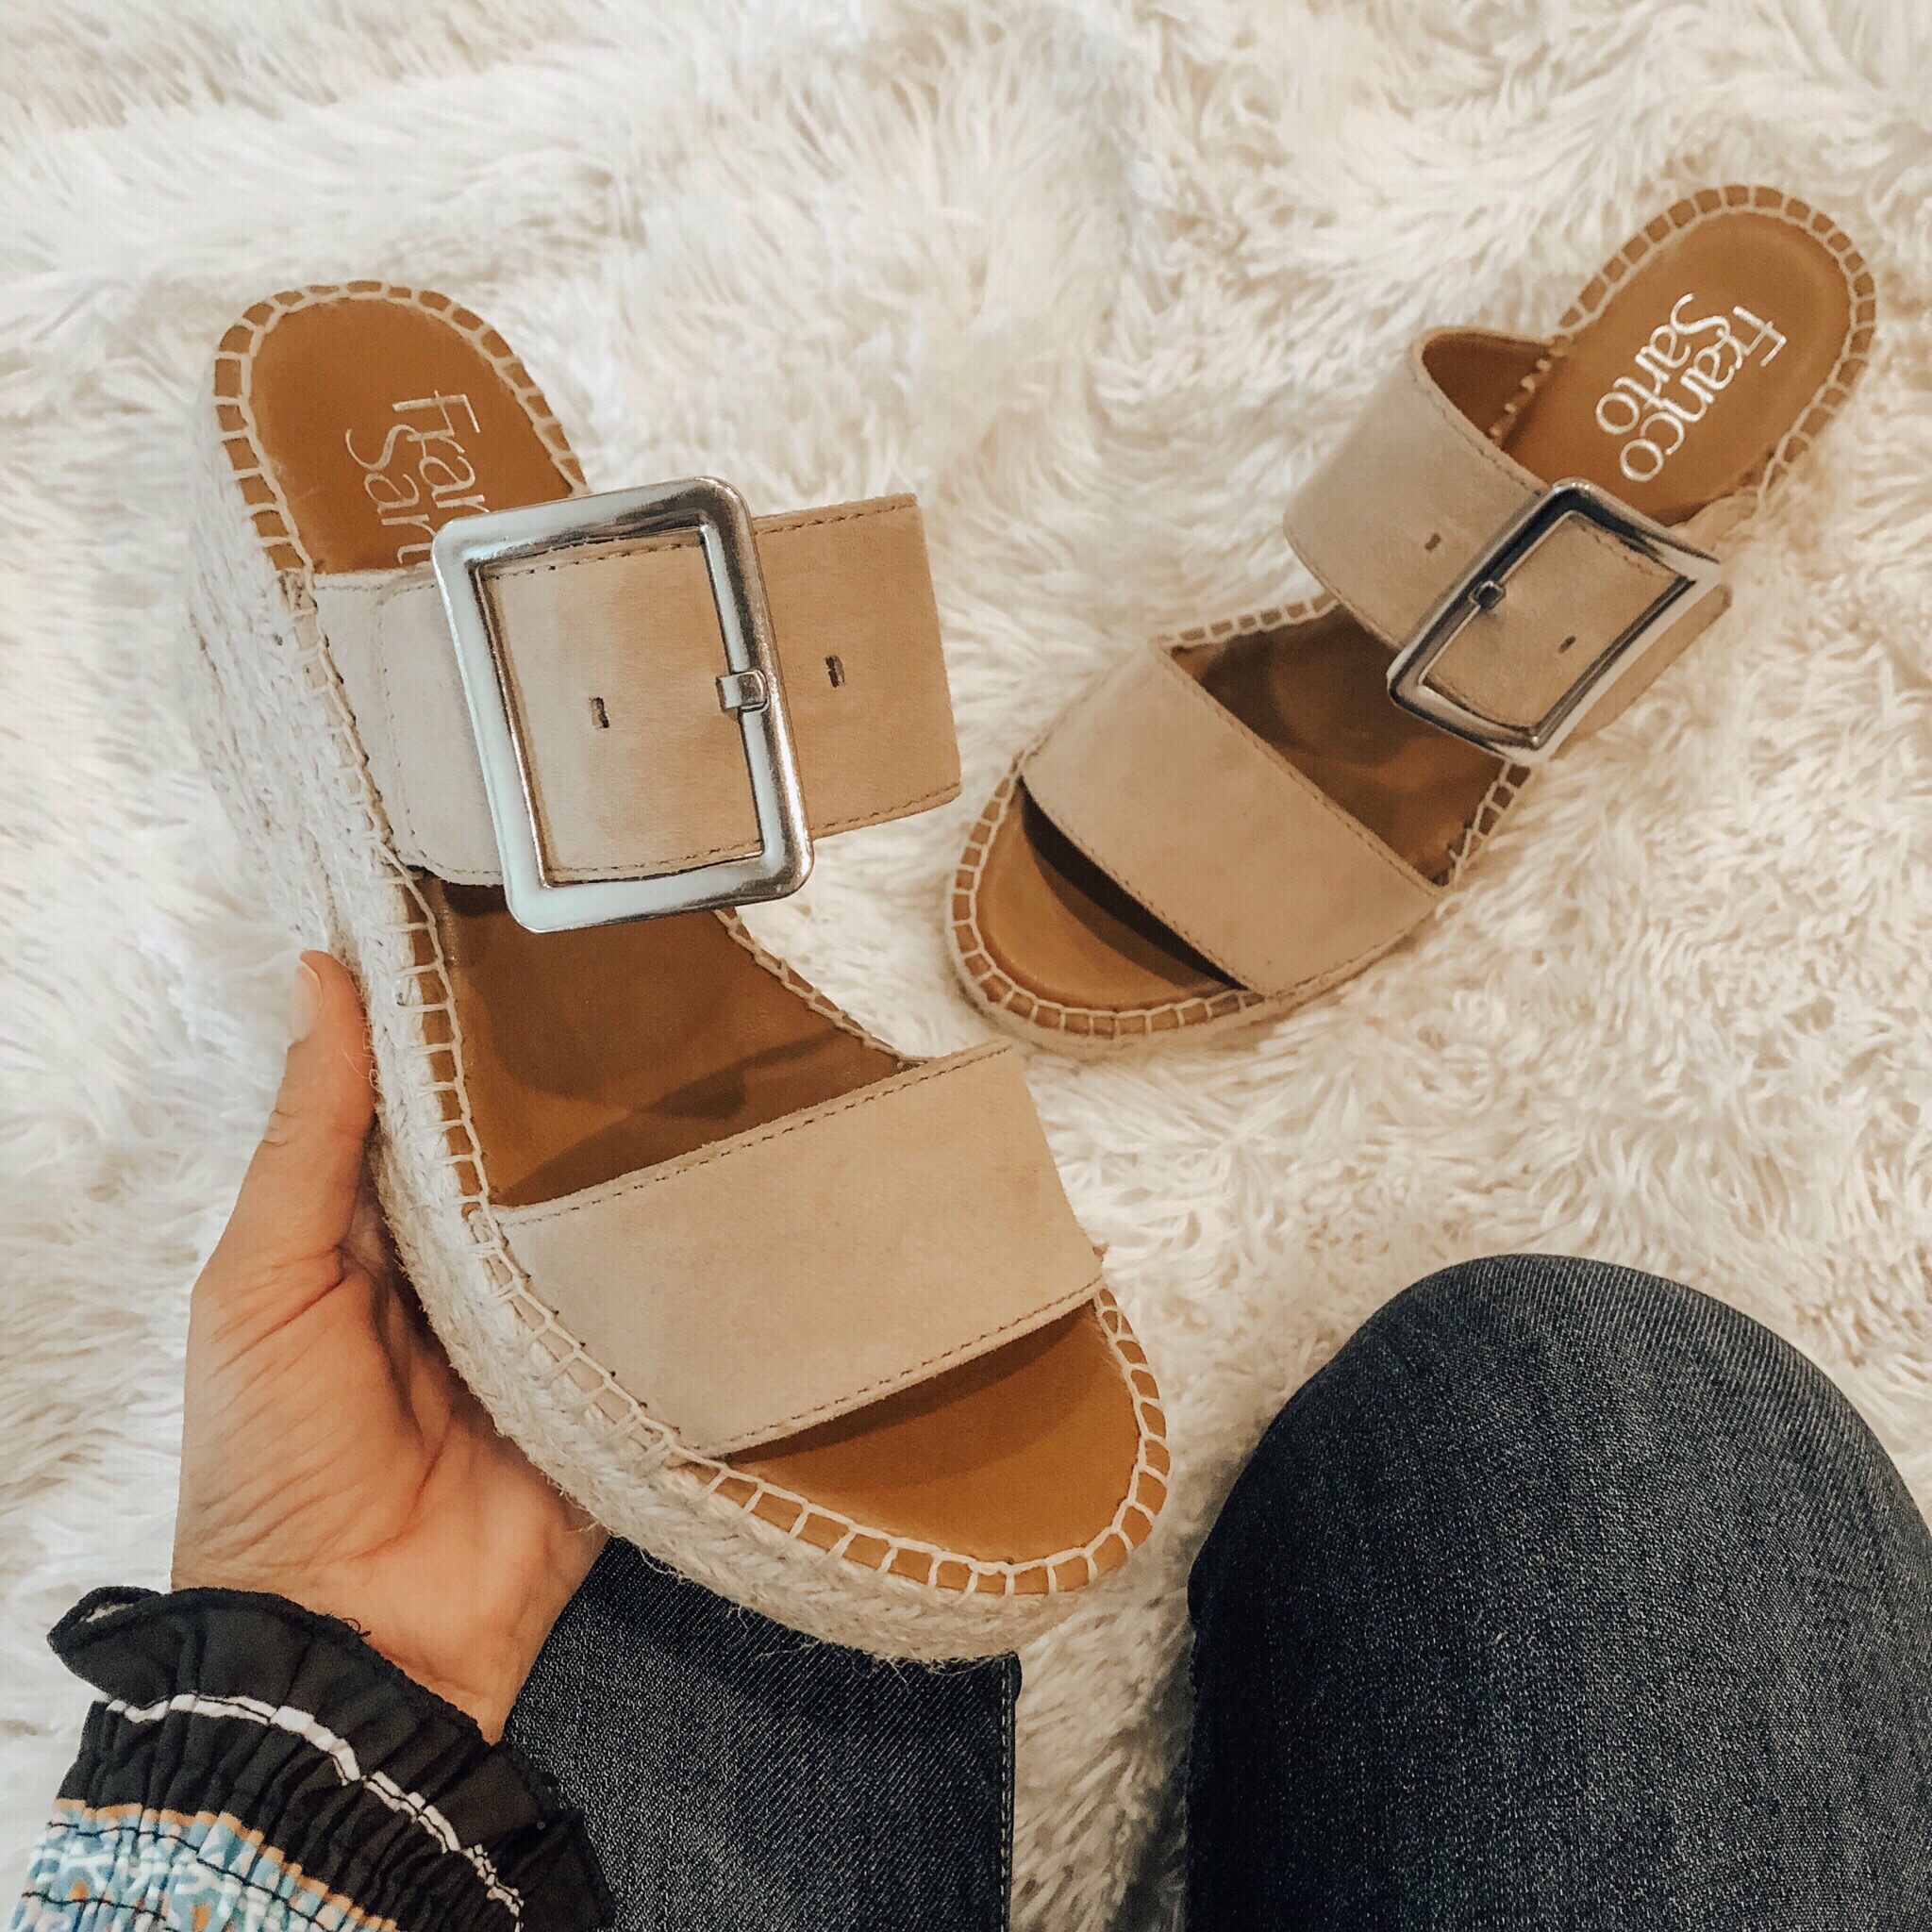 TOP 10 OF 2019- Jaclyn De Leon Style +Sharing the top selling items from 2019 including several Amazon finds, my favorite shoes, jewelry, graphic tees and of course my must have mom jeans.